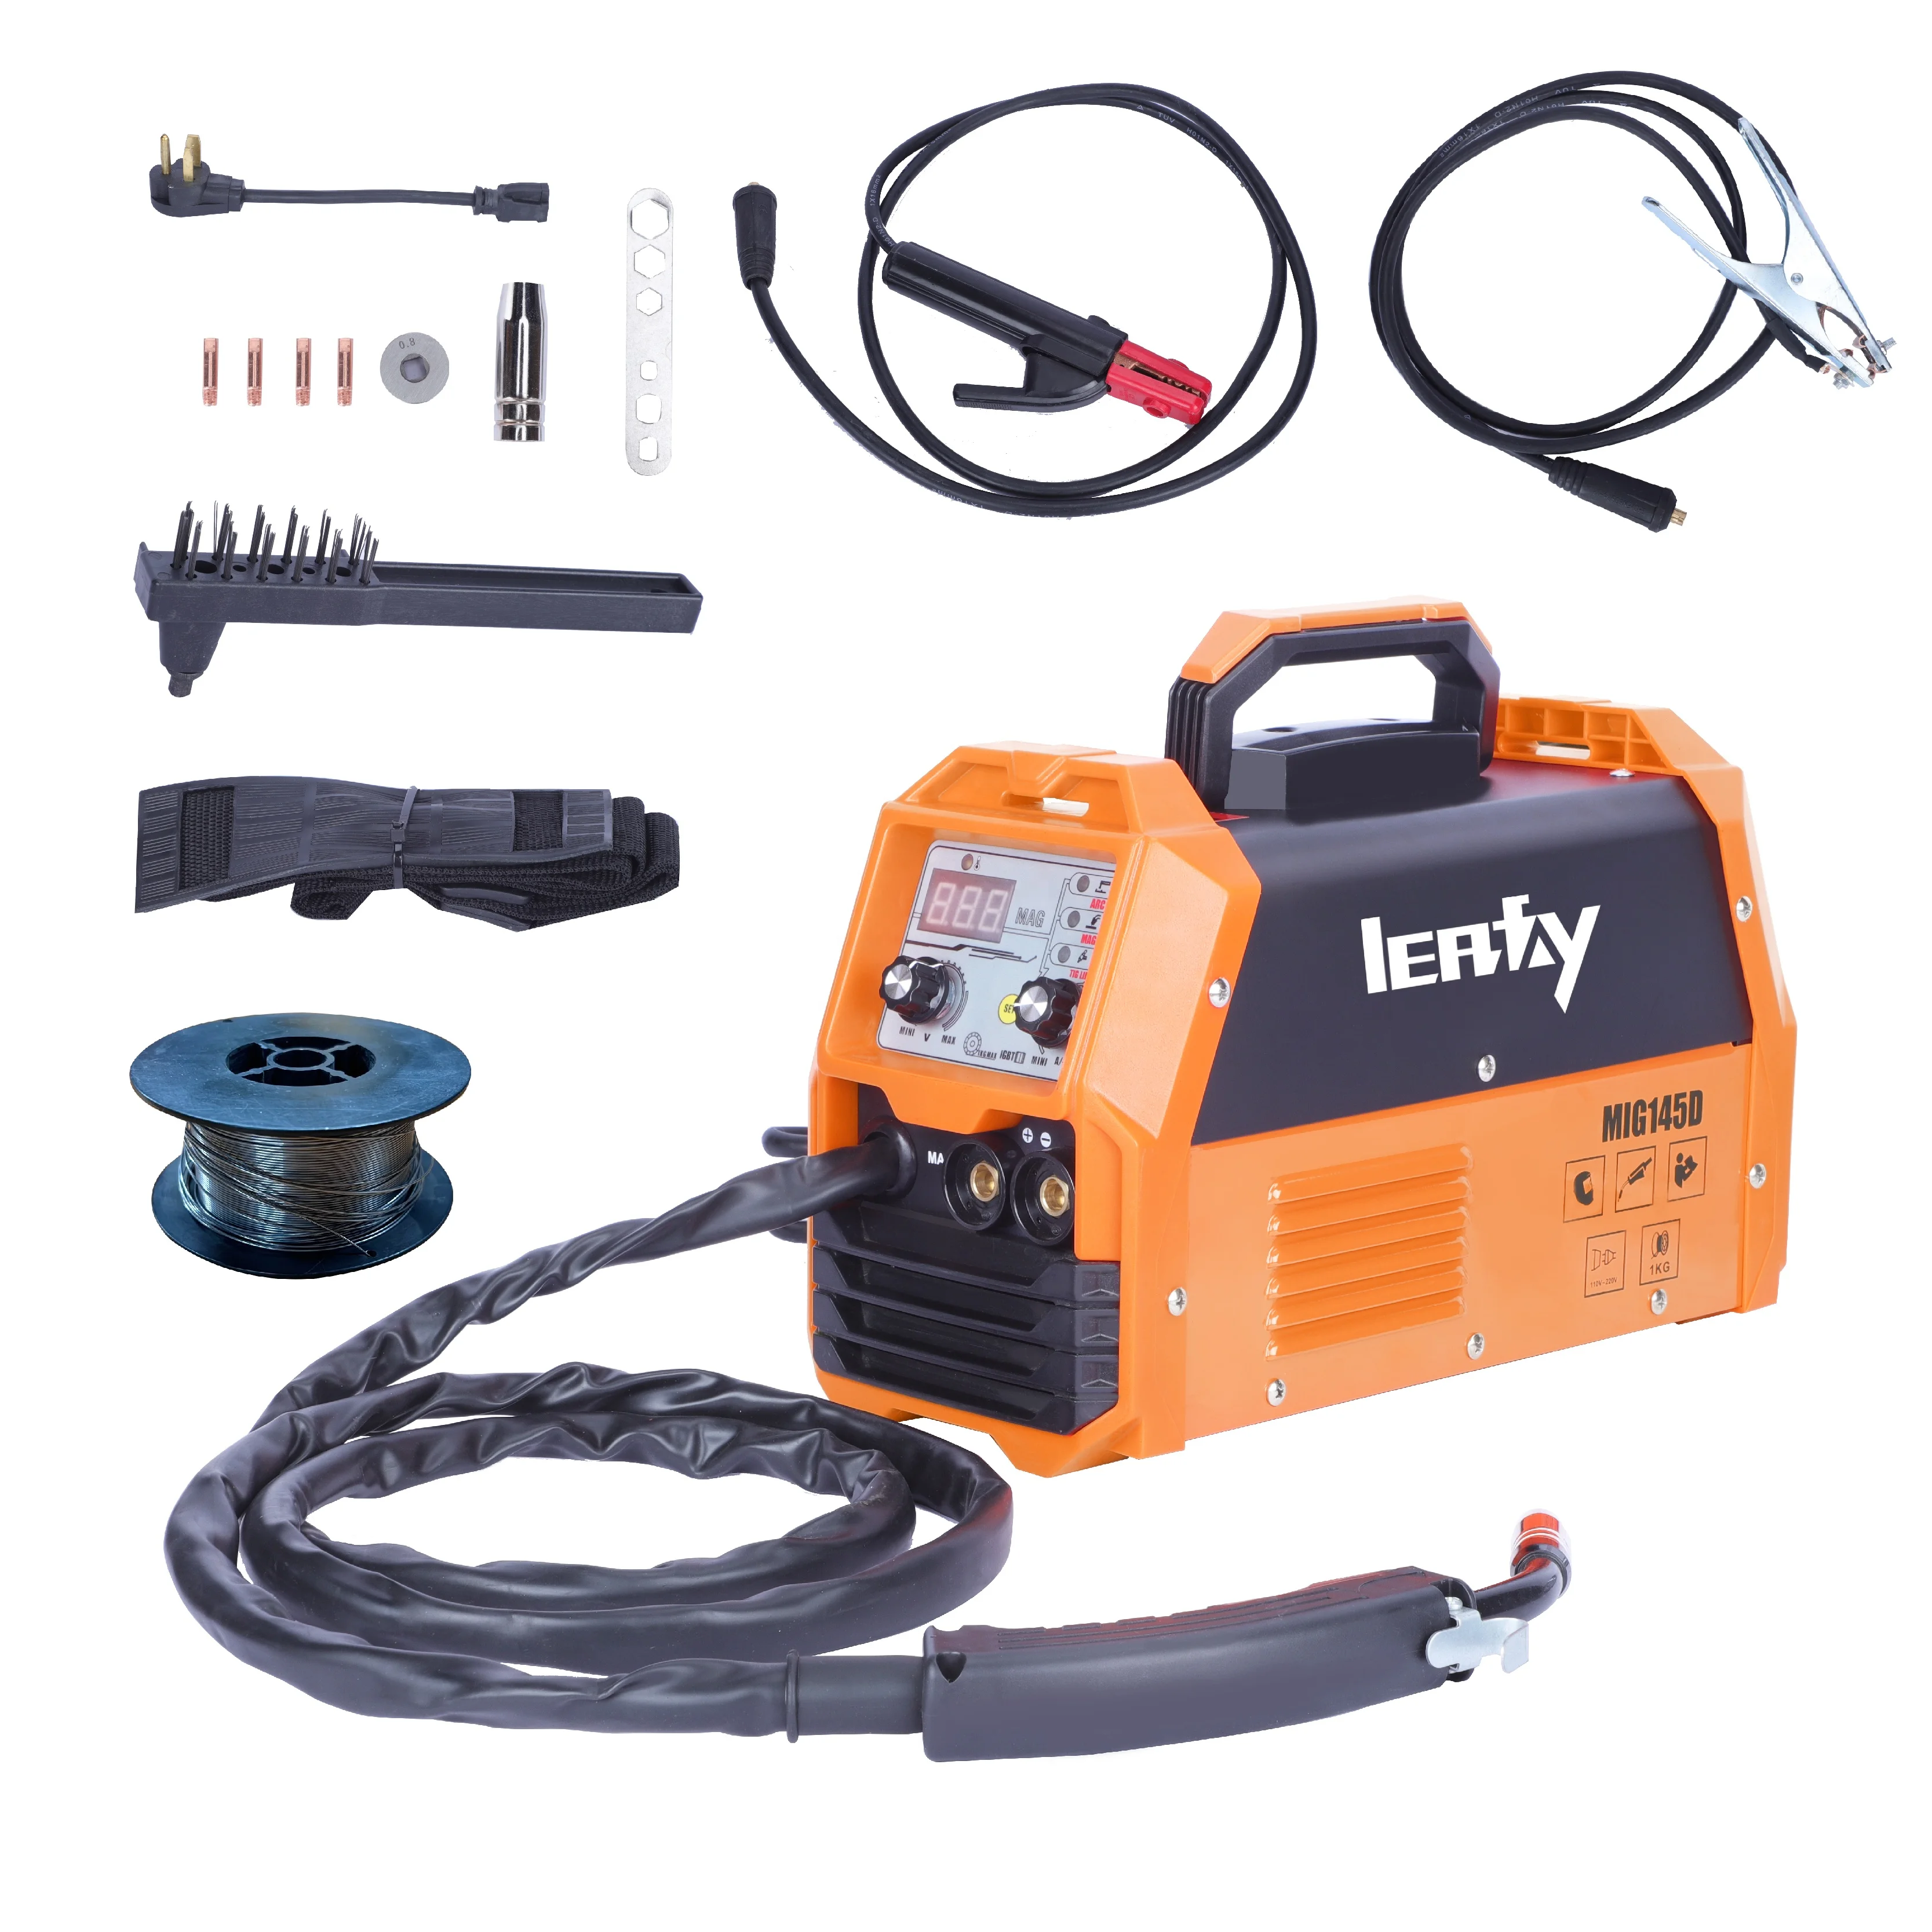 Dual Voltage 110 220V Portable Inverter Welder Multifunction MIG 120A Electric Welding Machine With MMA TIG LIFT